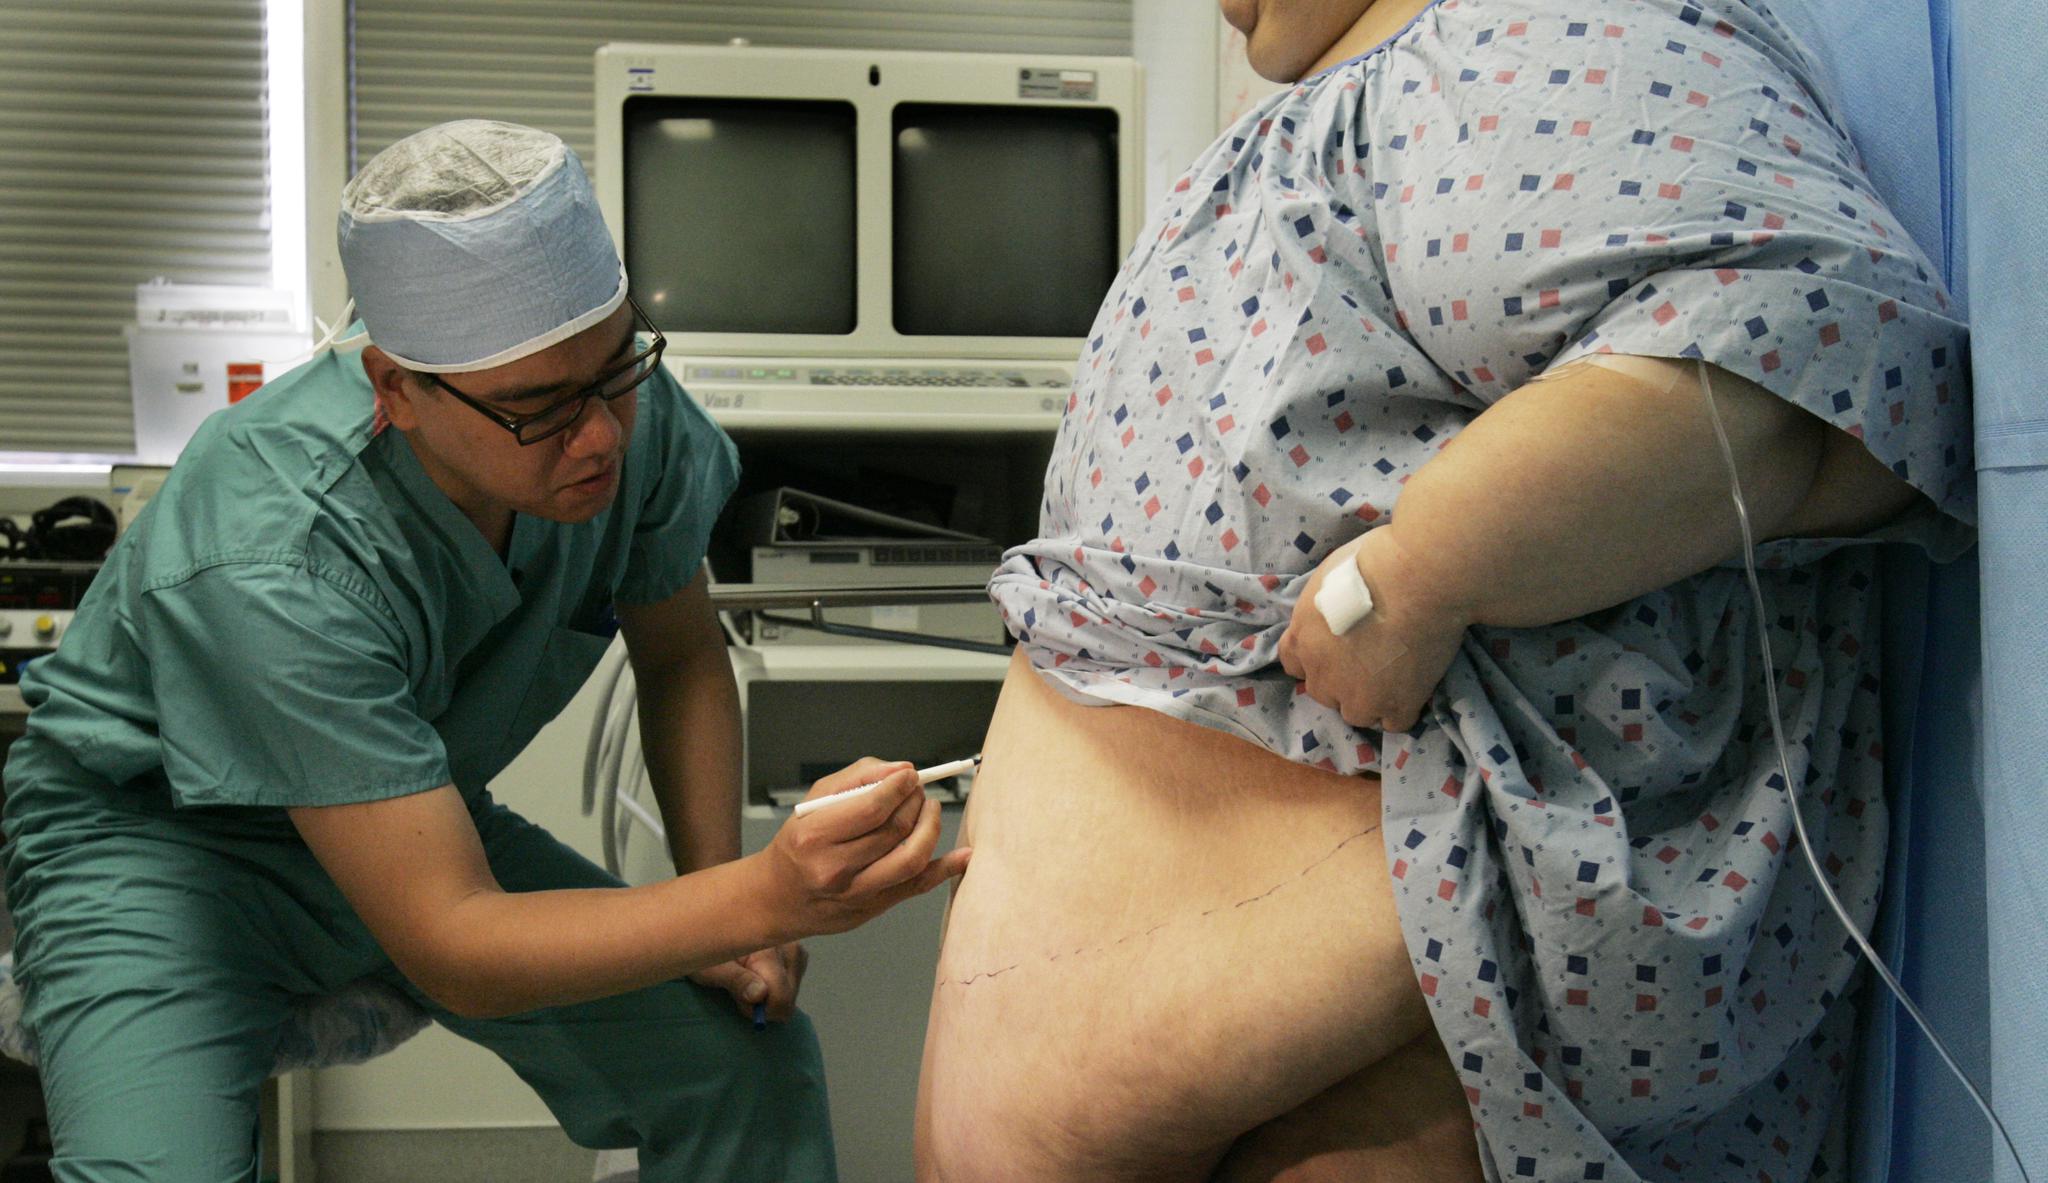 Weight-loss surgery should be an option for more patients, research says